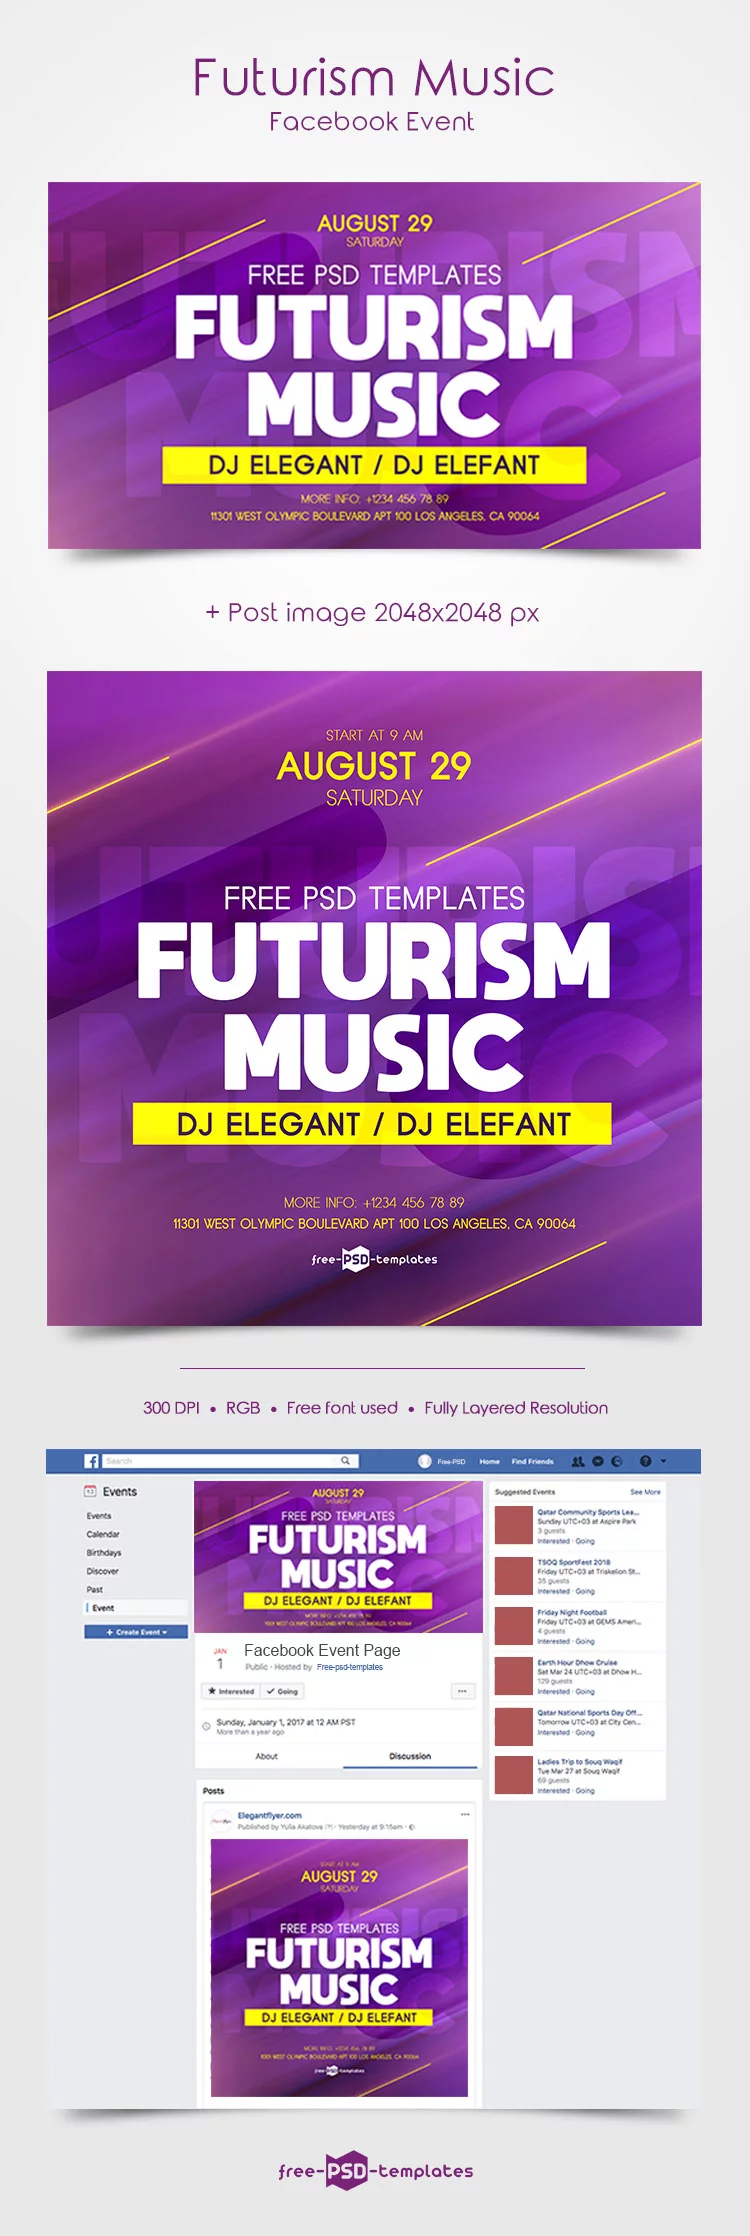 Free Futurism Music Facebook Event Page